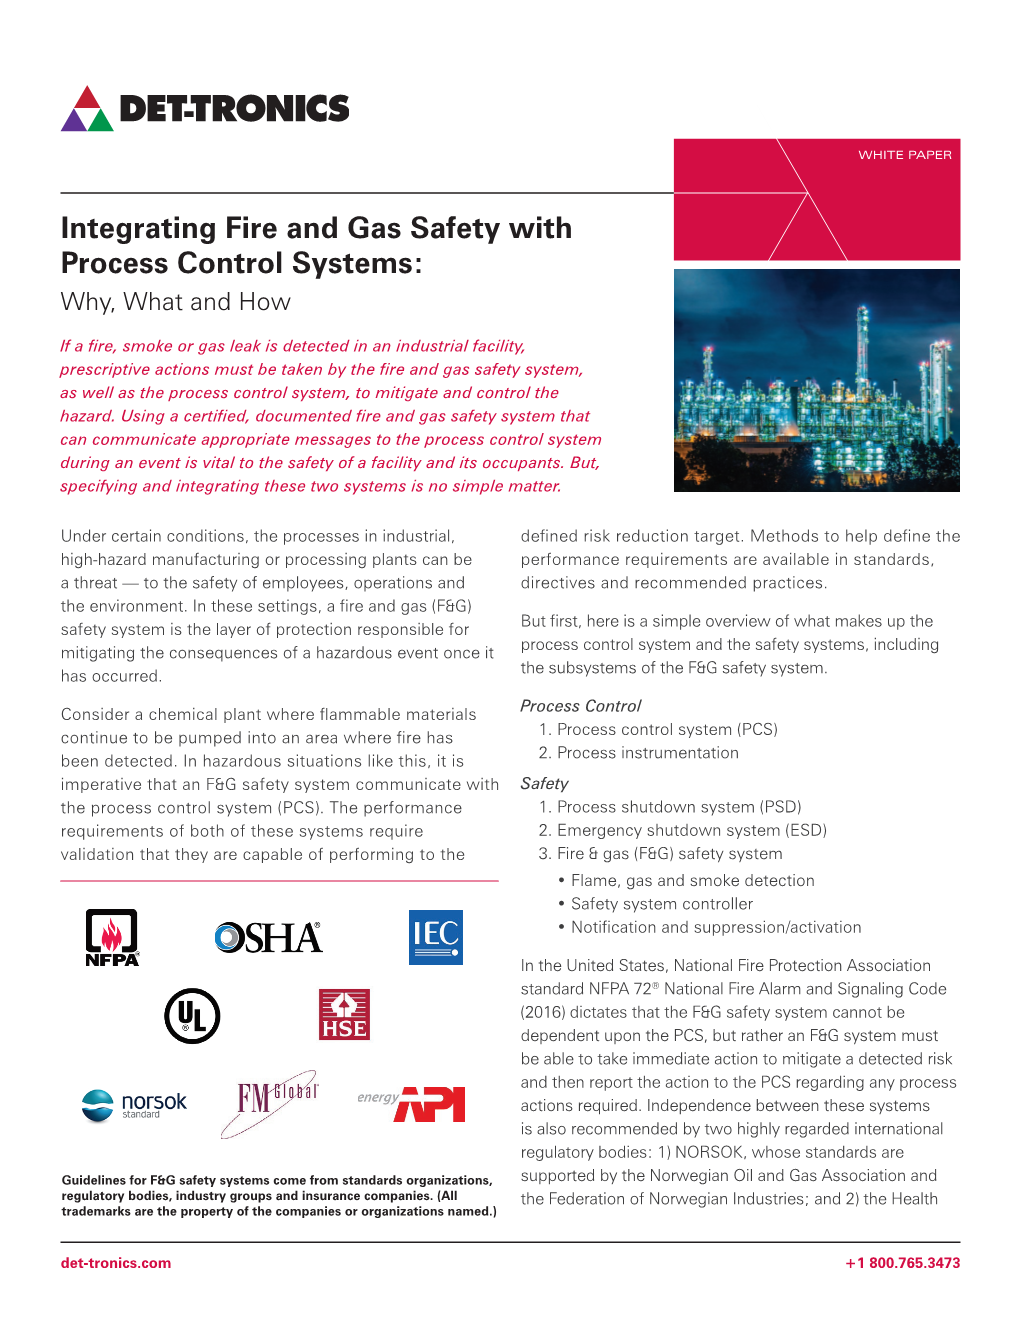 Integrating Fire and Gas Safety with Process Control Systems: Why, What and How